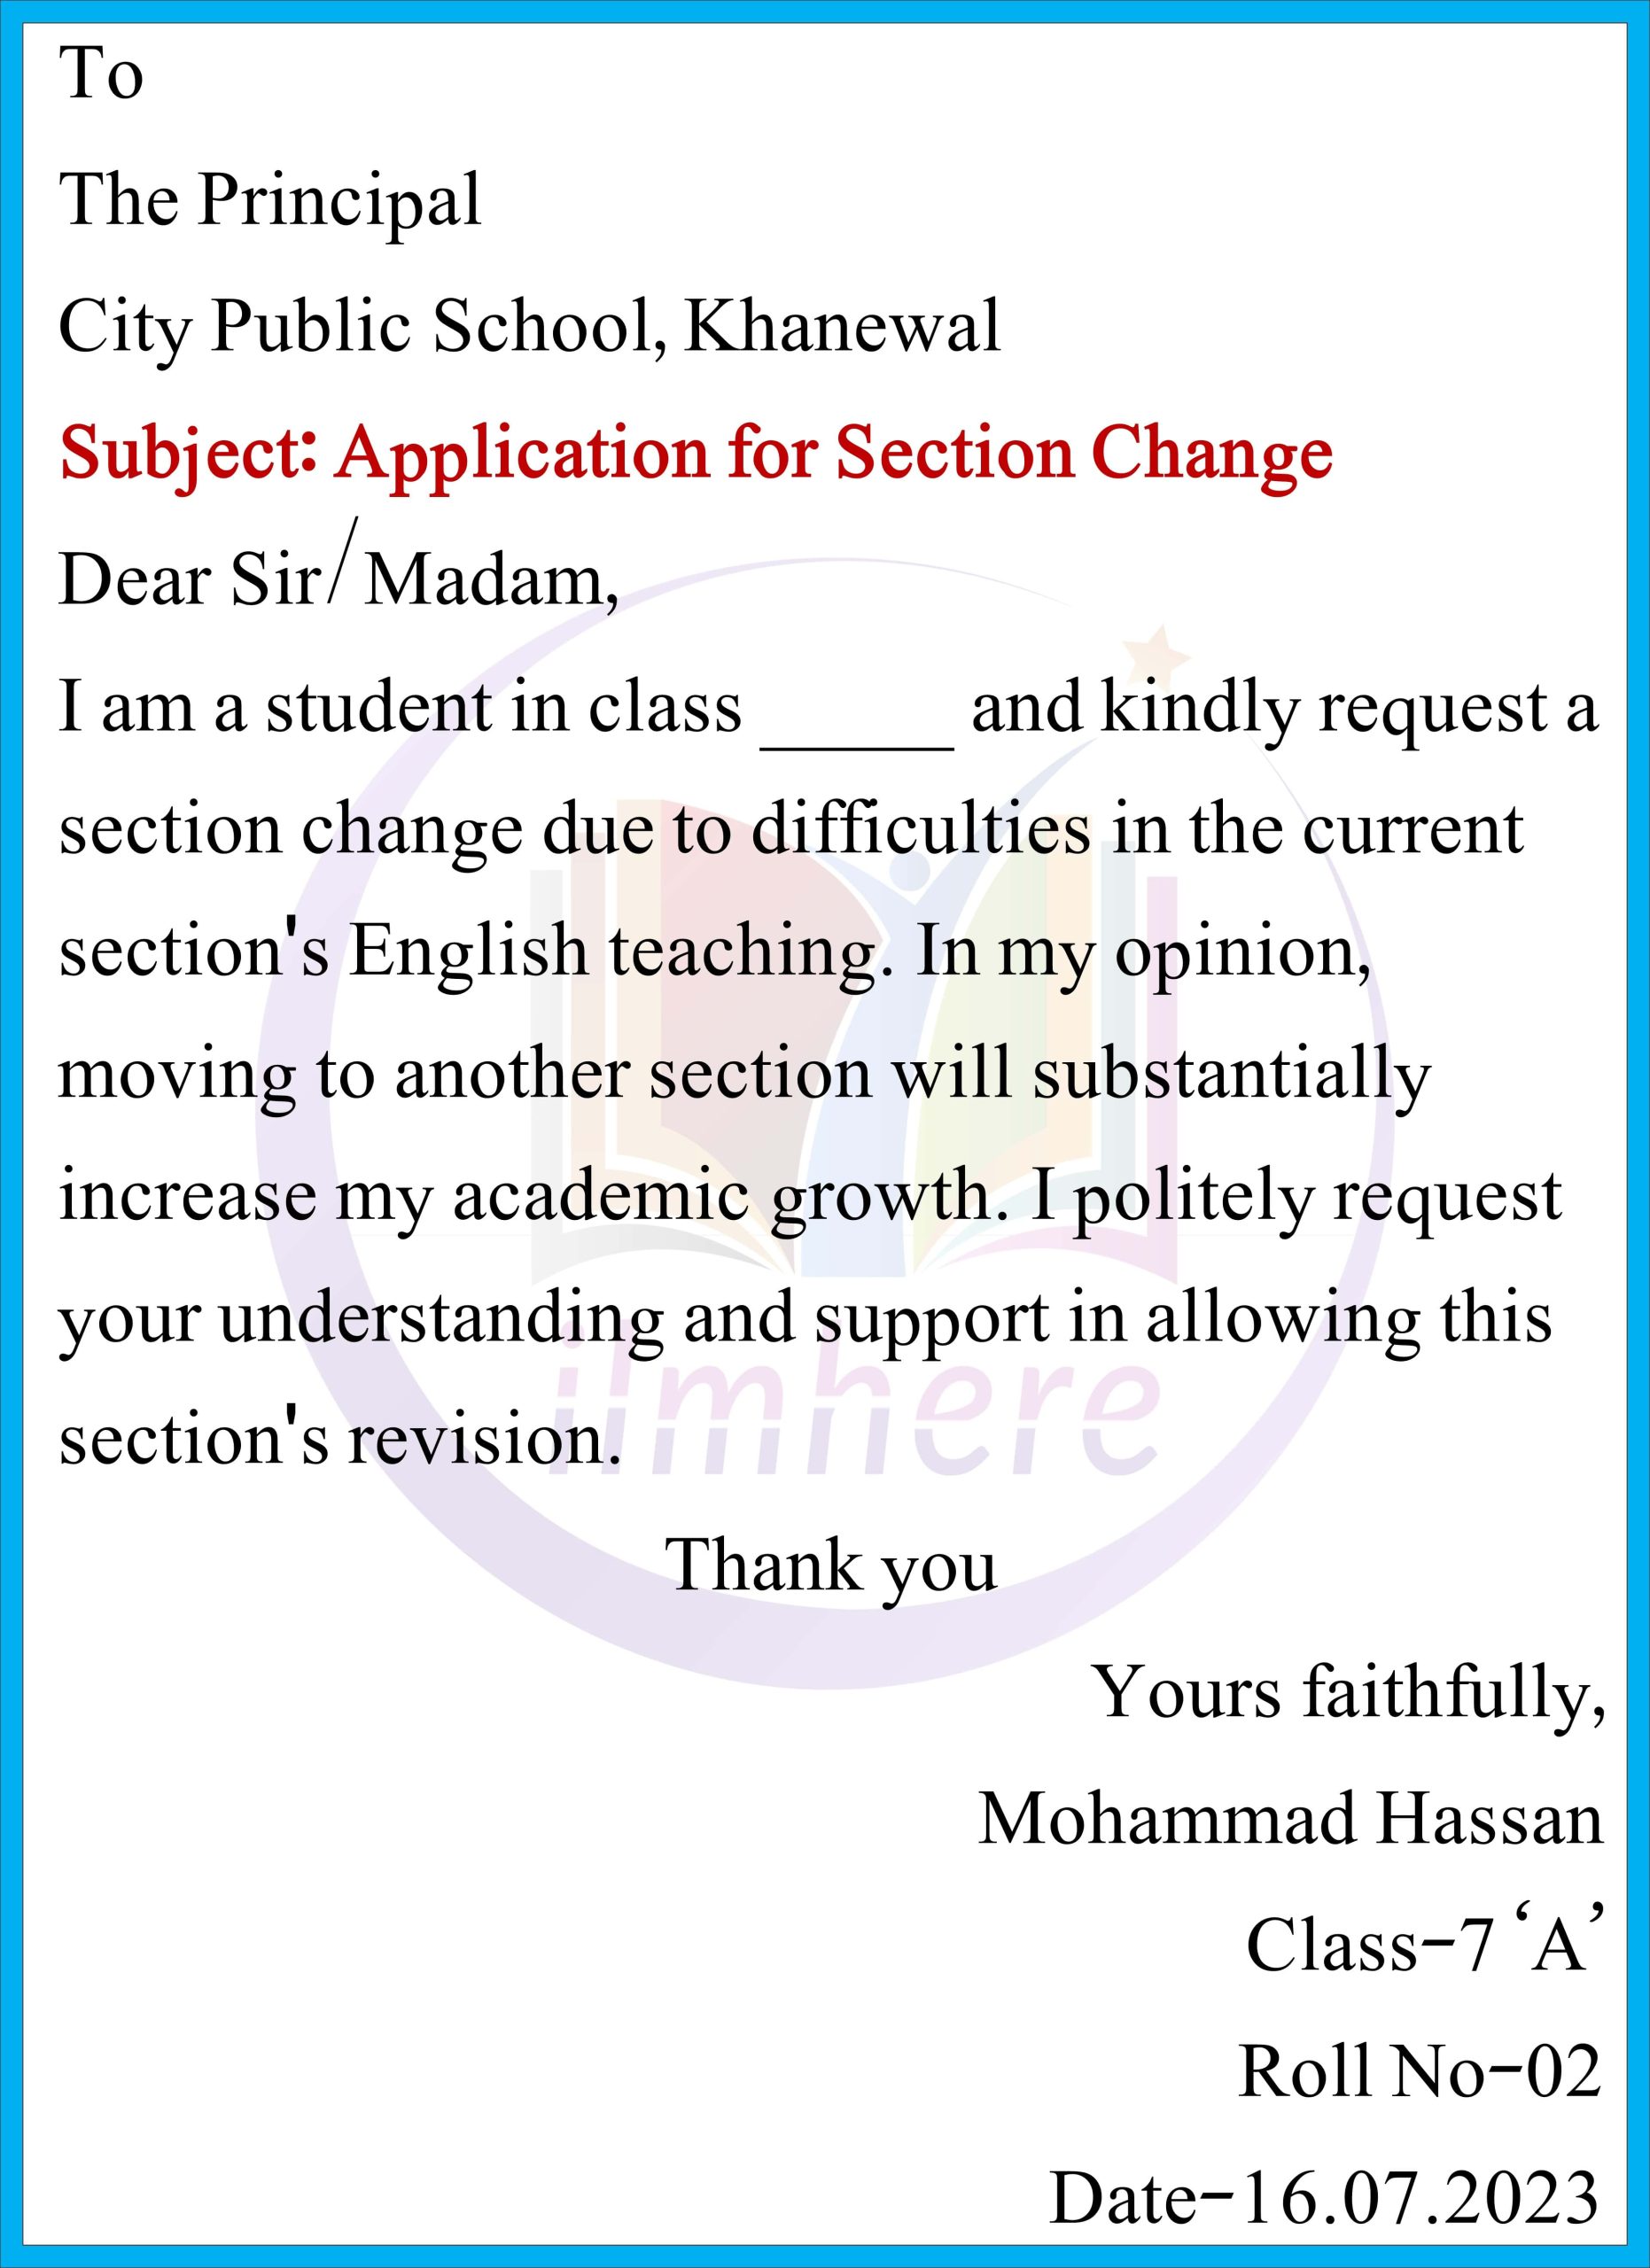 Write an Application for Section Change to the Headmaster